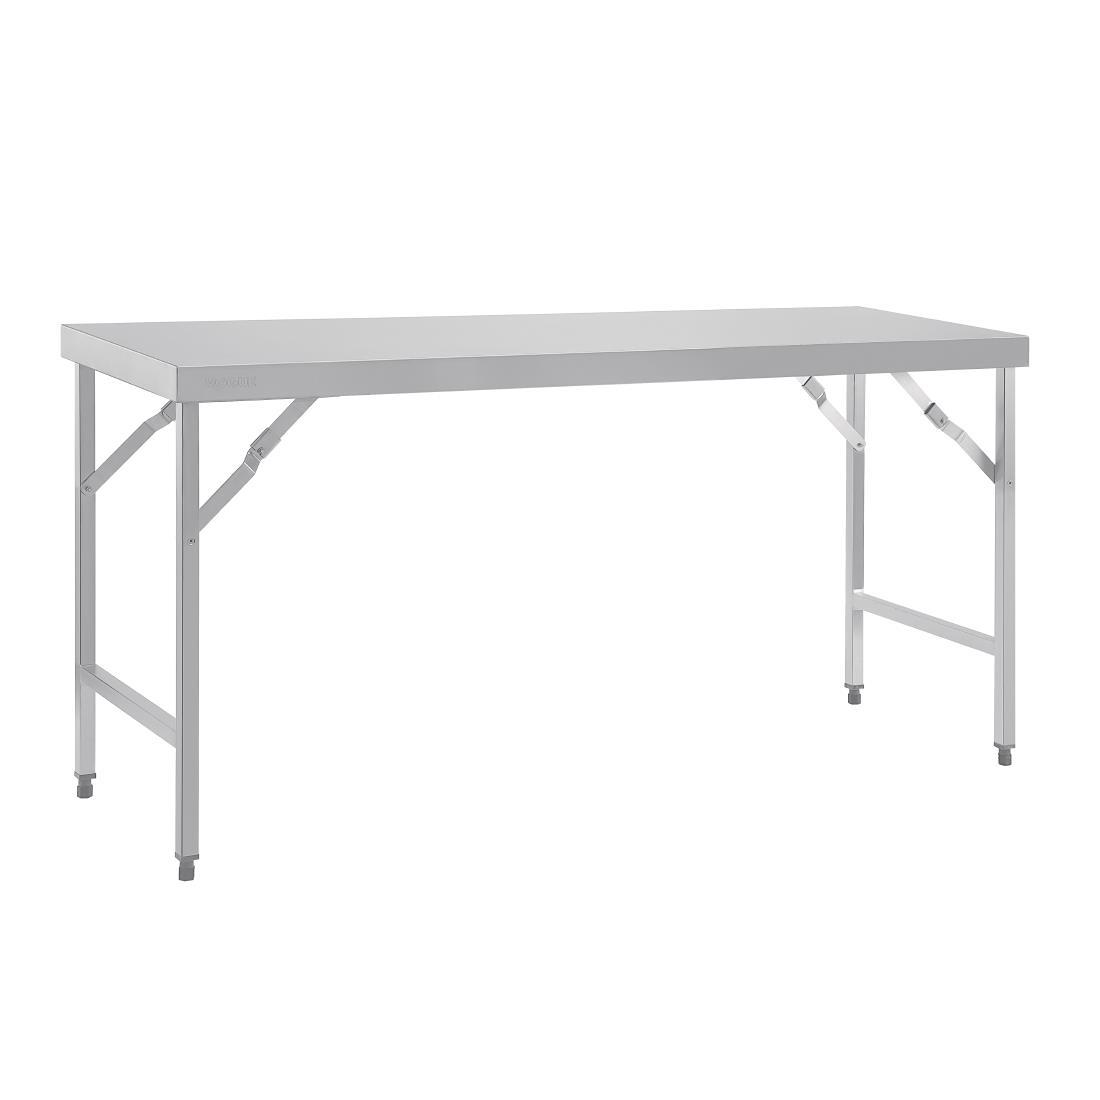 Vogue Stainless Steel Folding Table 1800mm - CB906  - 3